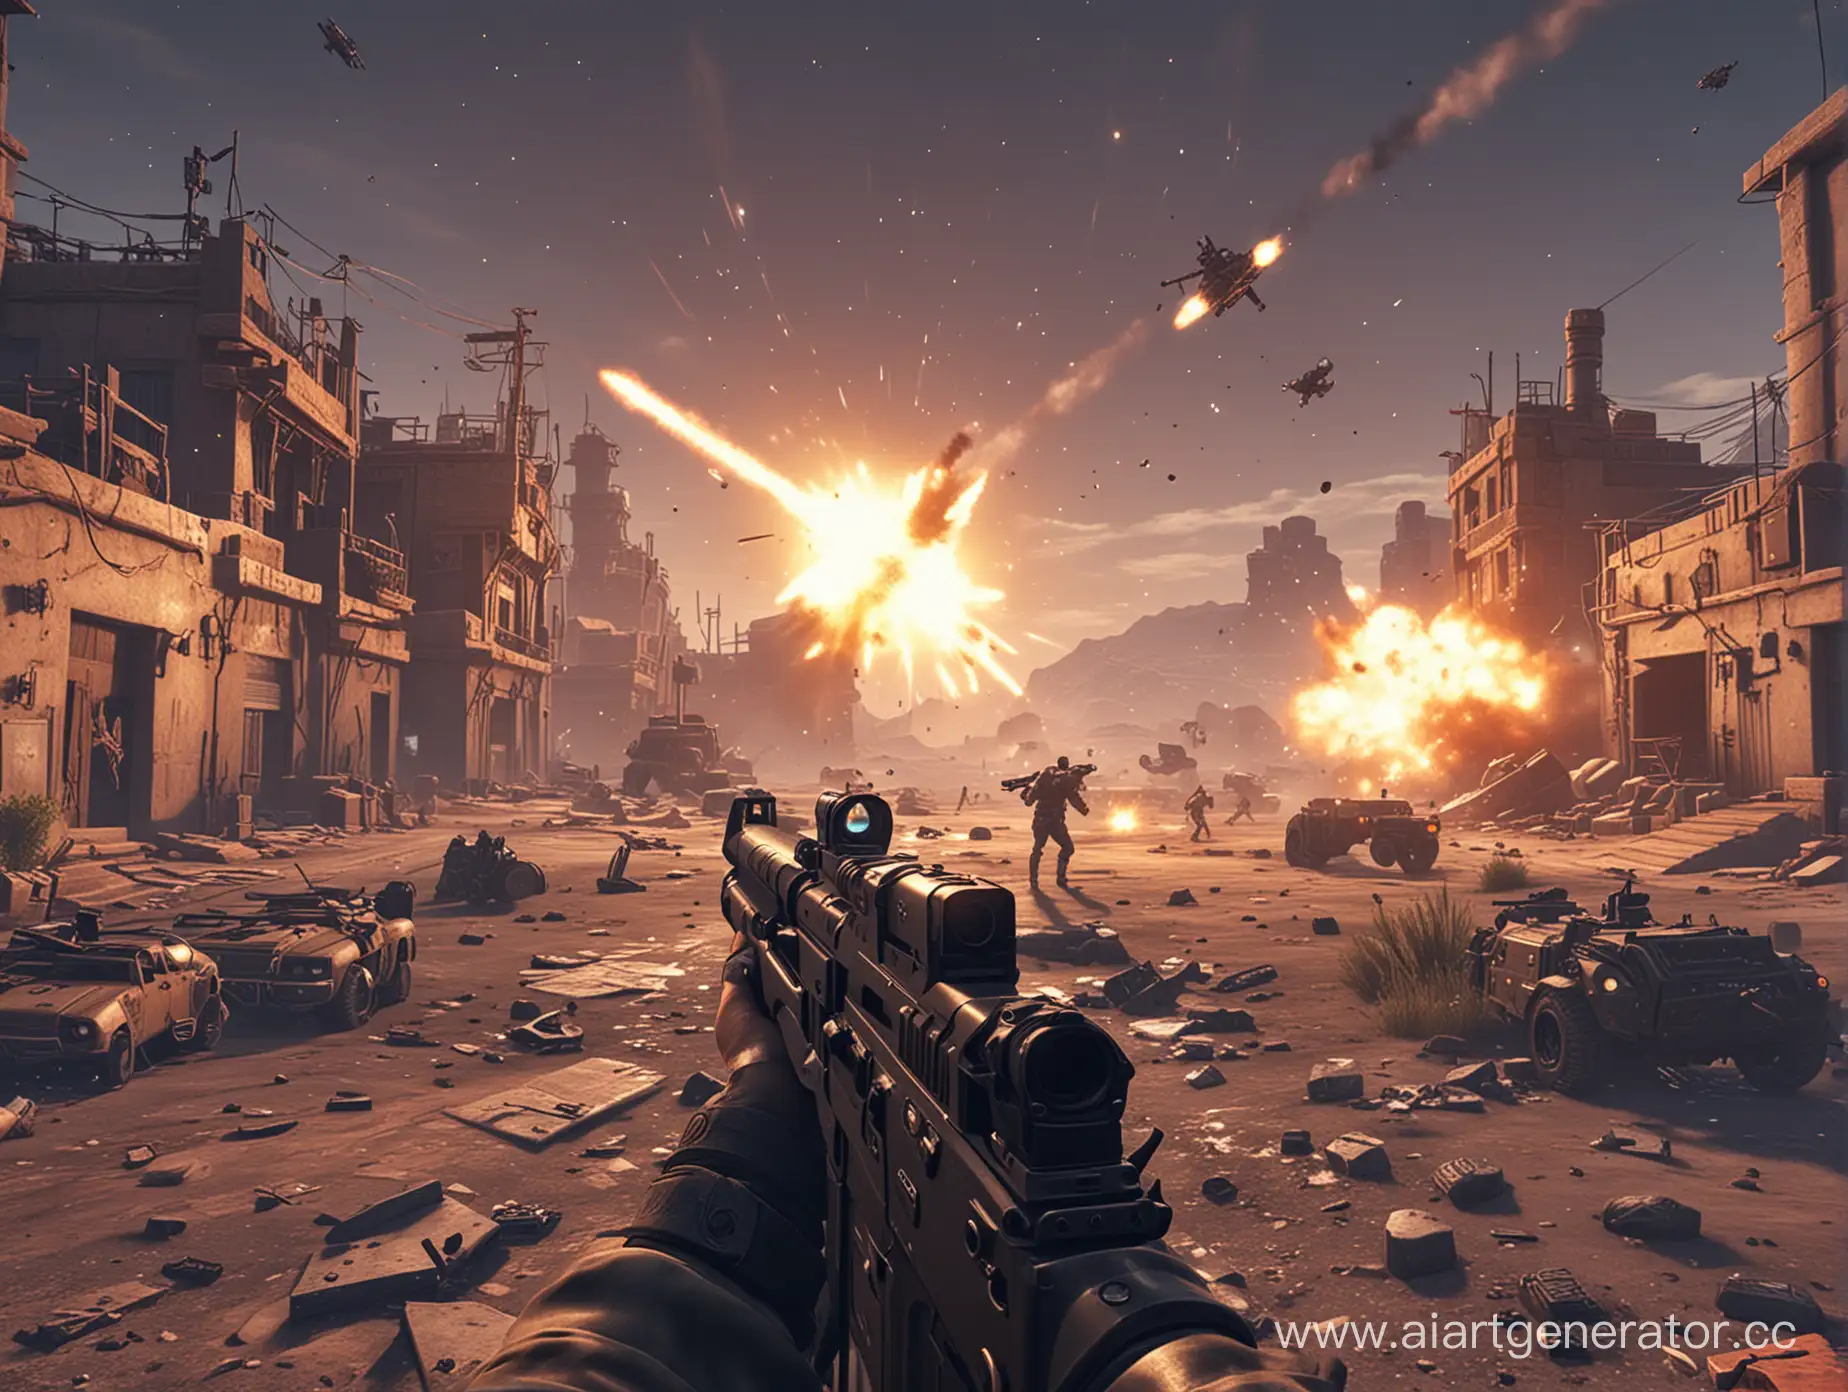 Intense-Combat-Scene-in-a-Virtual-Reality-Shooter-Game